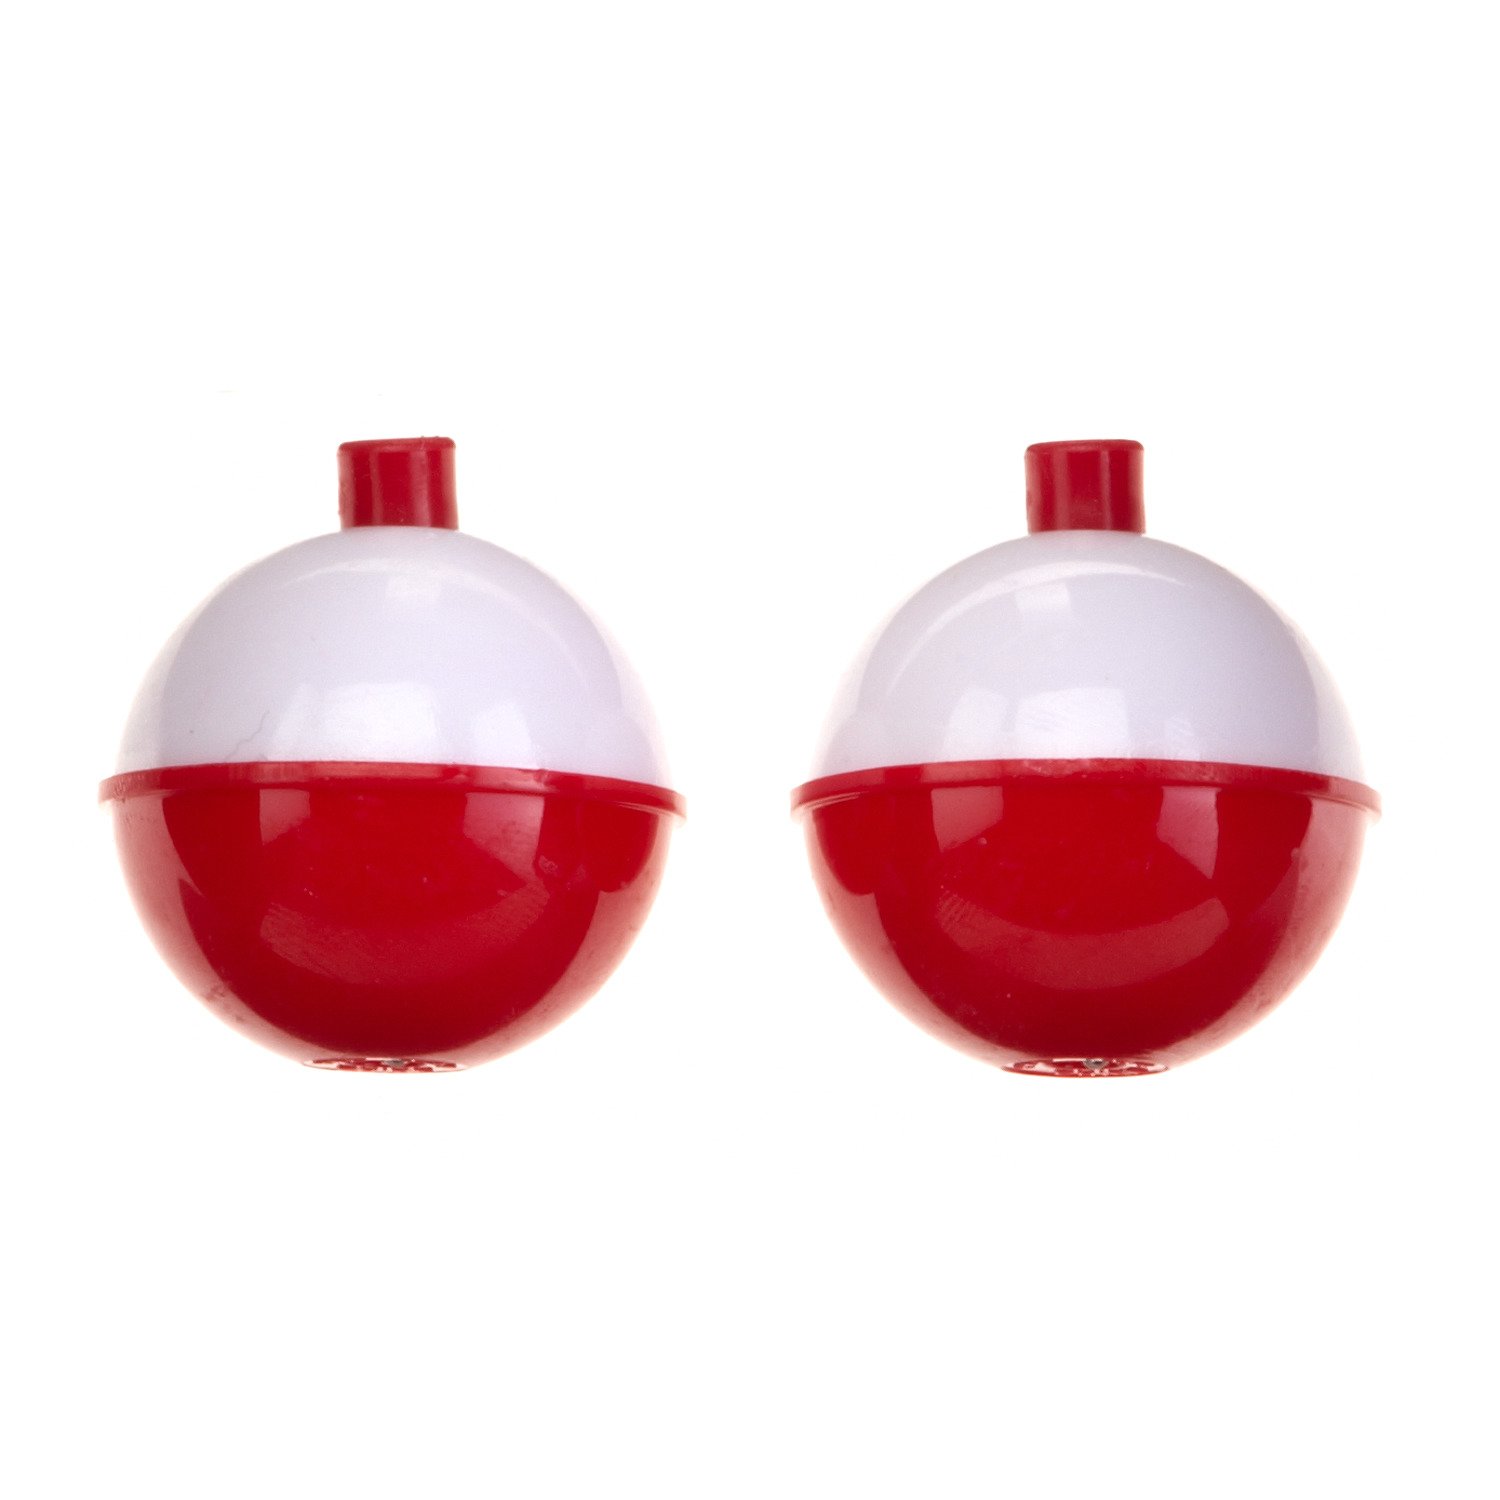 Academy Sports + Outdoors Eagle Claw -/2 Snap-On Floats 2-Pack